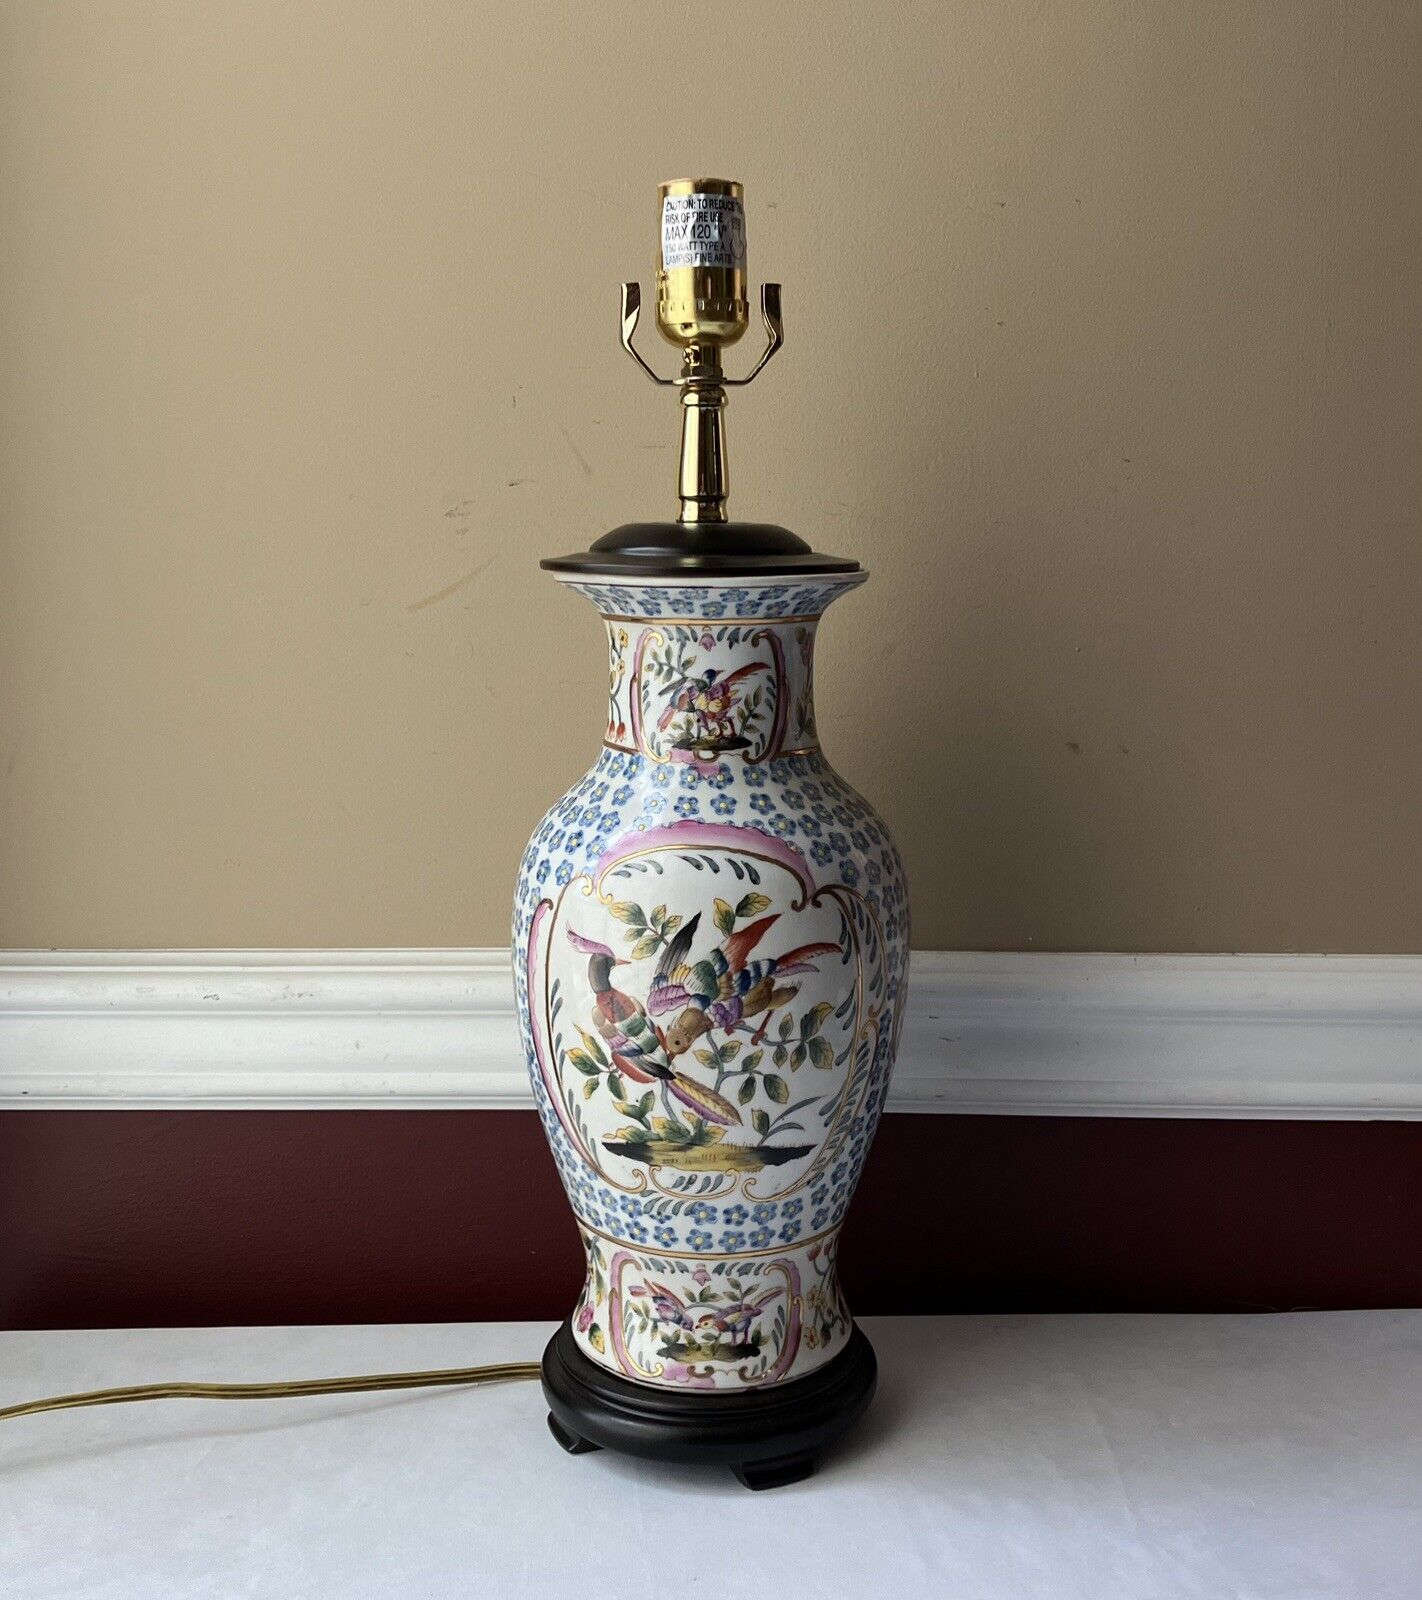 Vintage Chinese Porcelain Lamp with Colorful Bird Design, Working